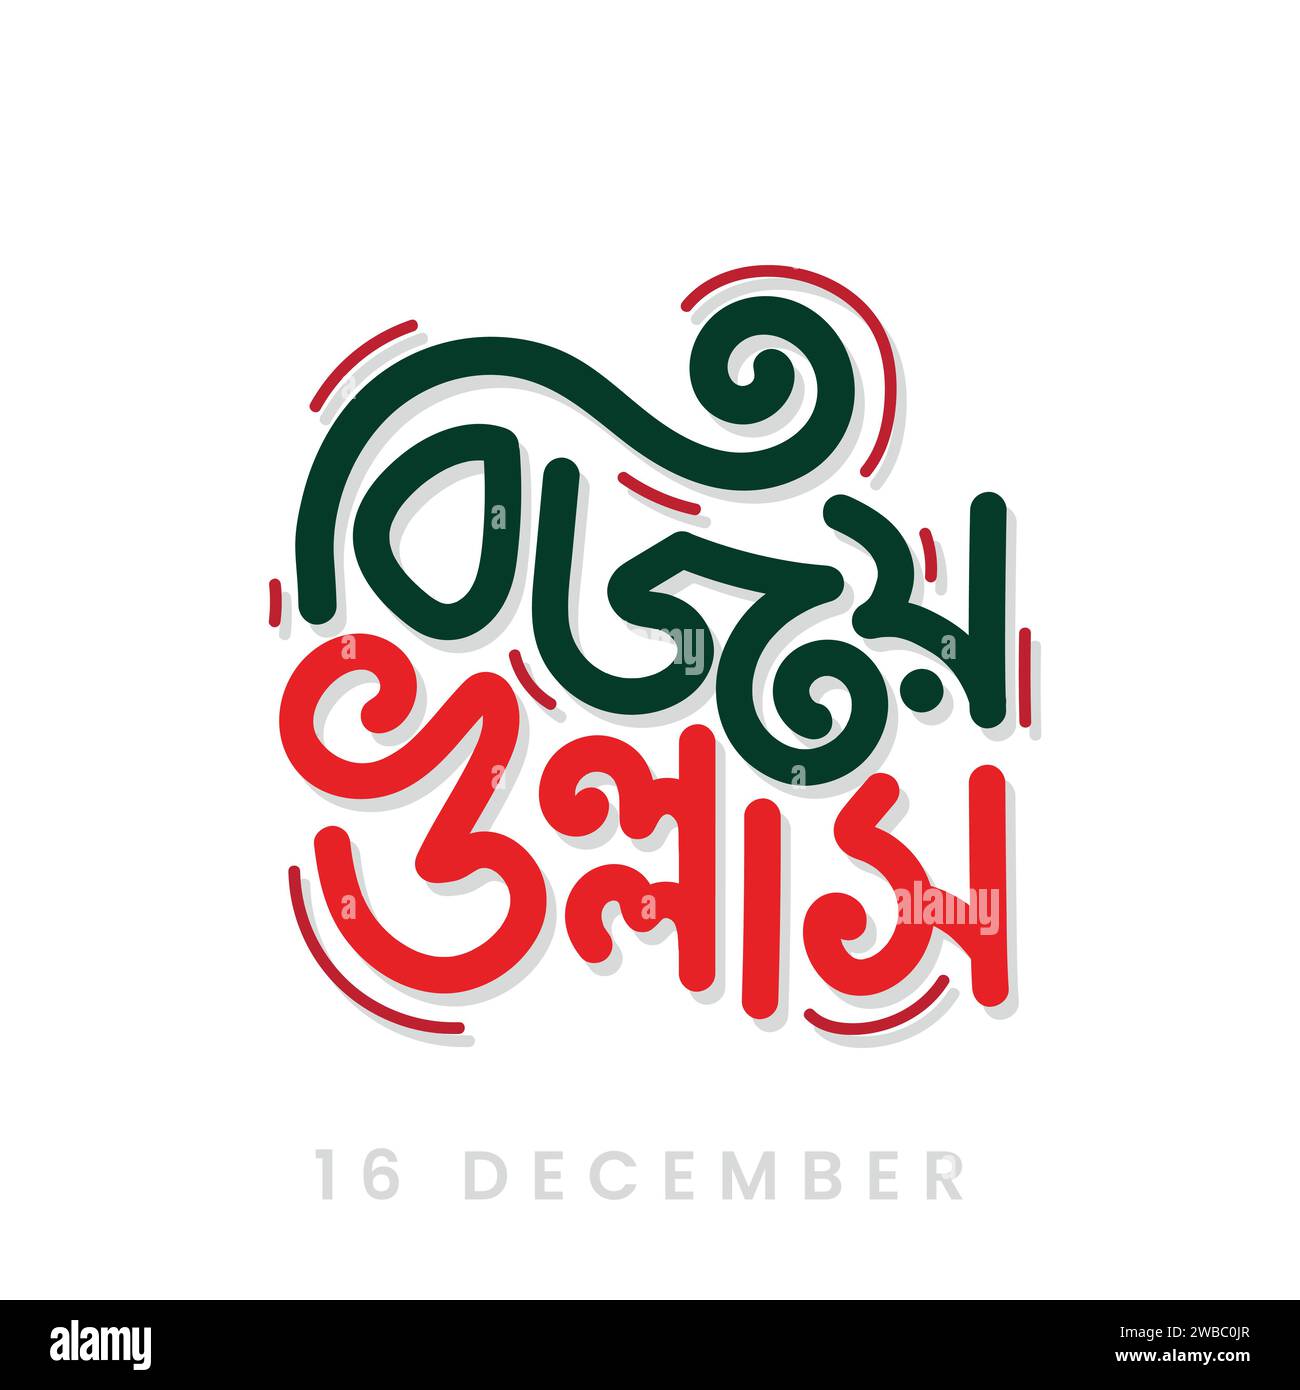 Bangla typography and lettering design for celebration the victory day of Bangladesh on 16 December. National martyrs day of Bangladesh. Victory day g Stock Vector